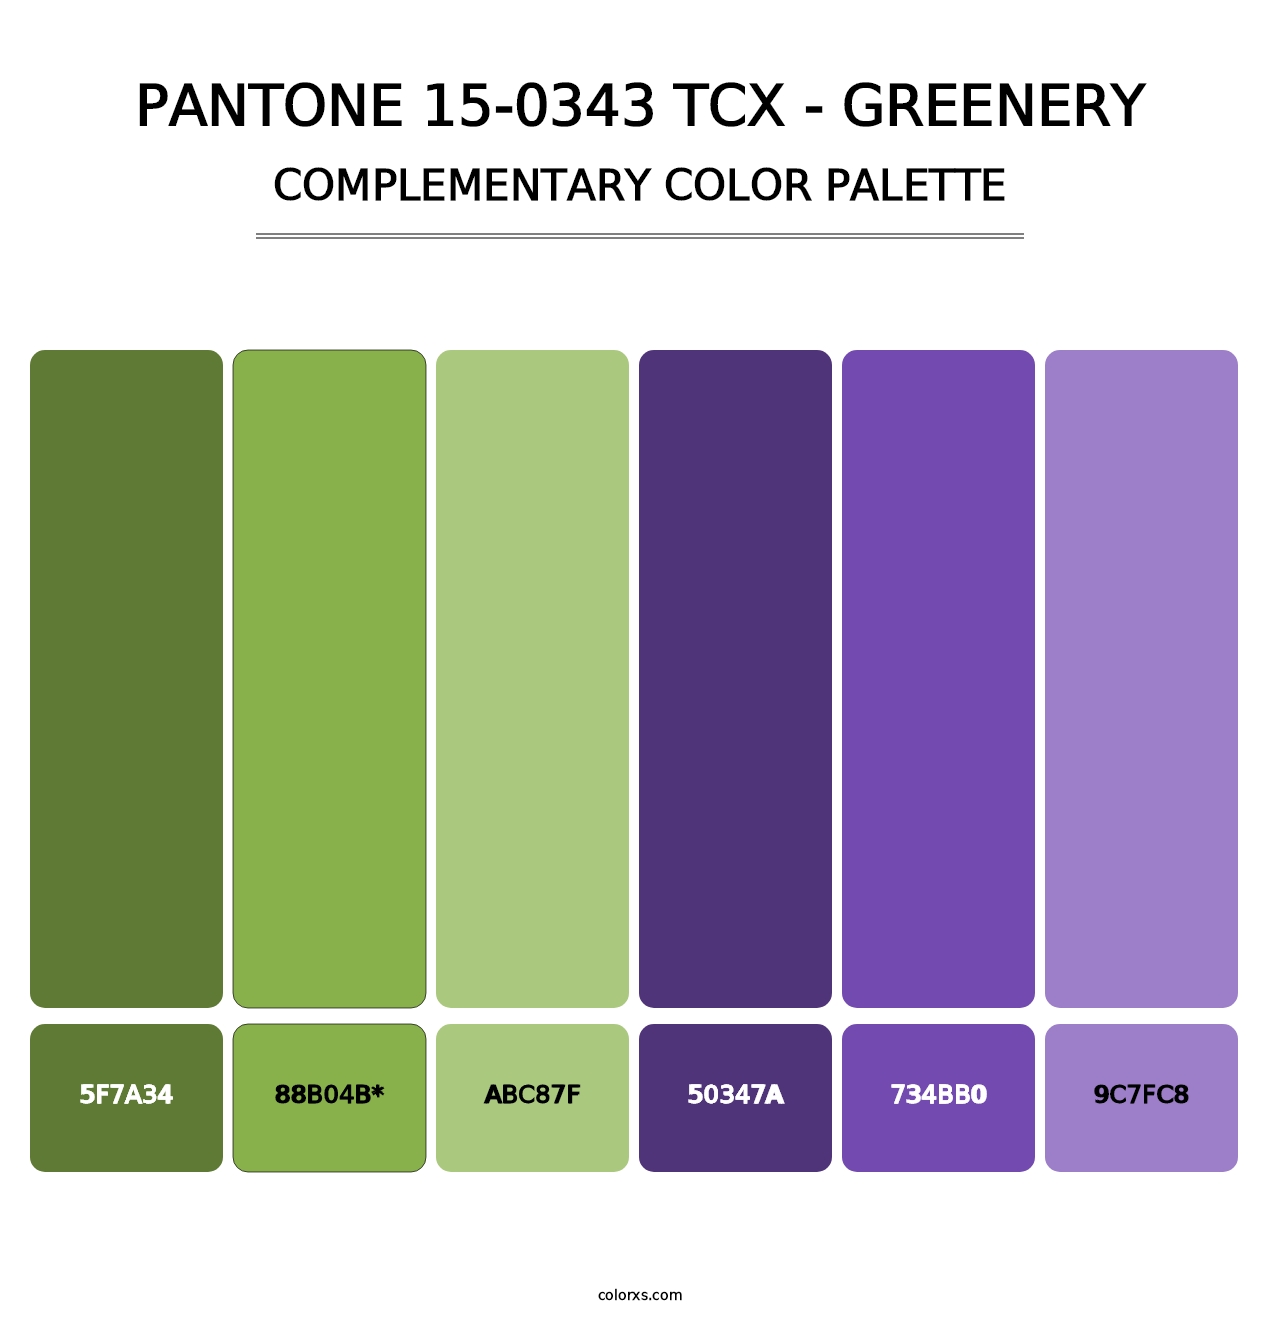 PANTONE 15-0343 TCX - Greenery - Complementary Color Palette